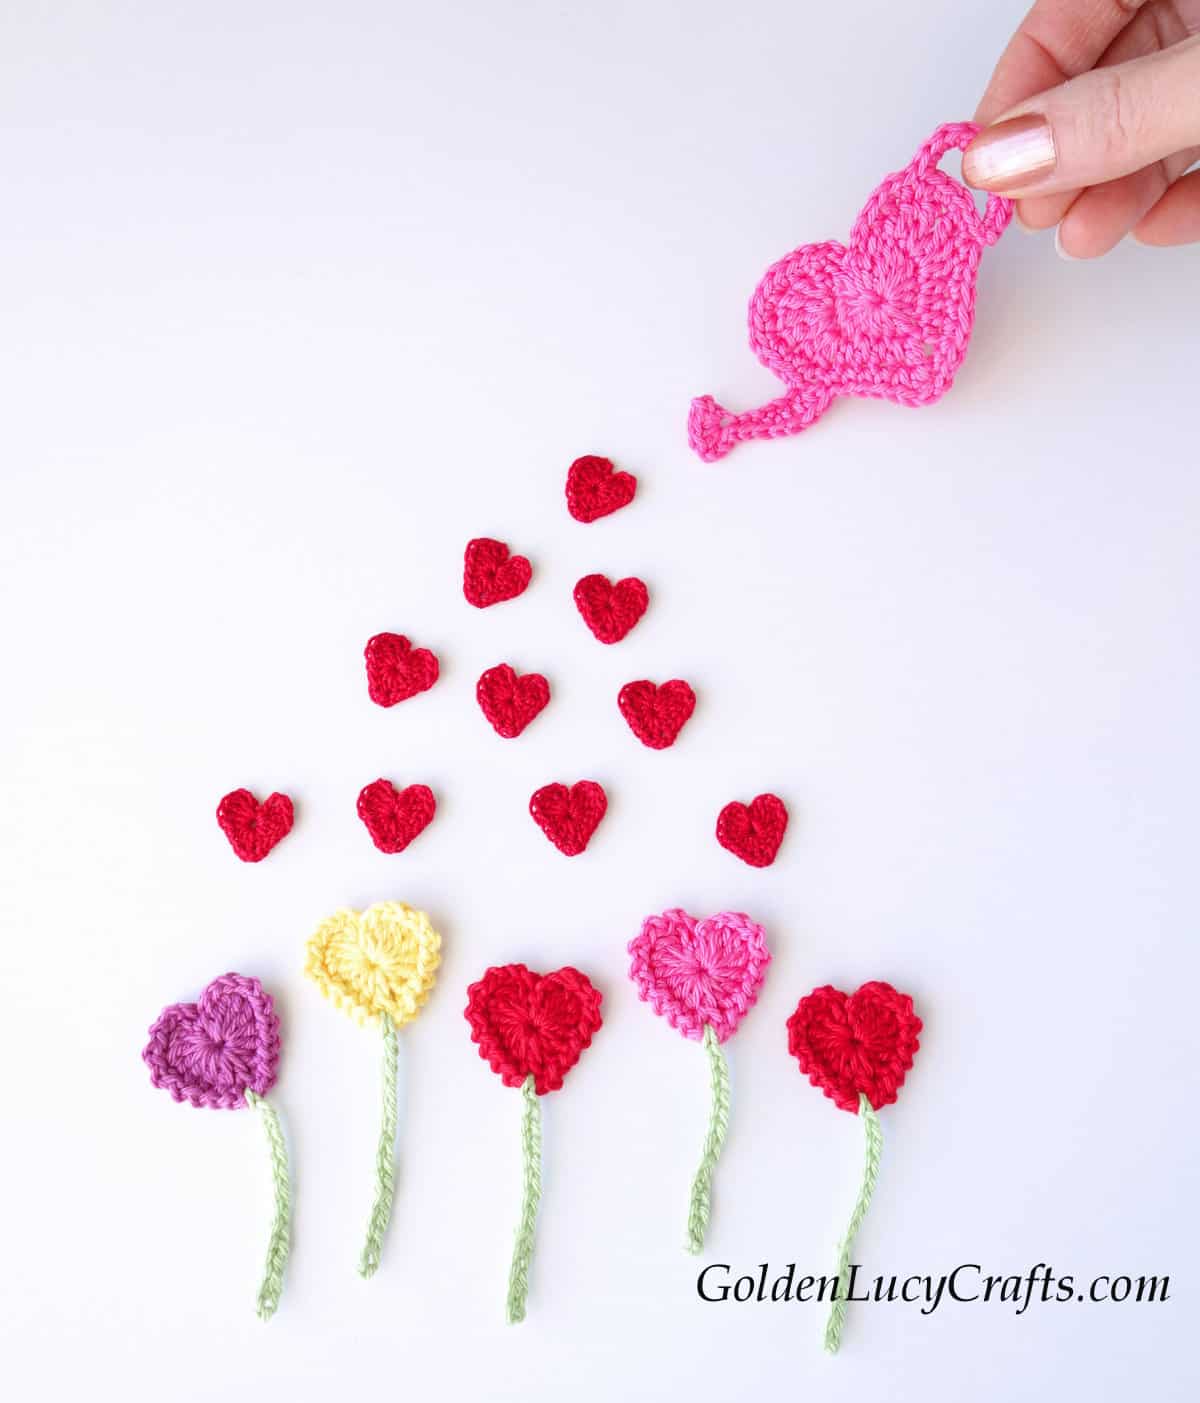 Crochet appliques heart flowers, watering can, small hearts.